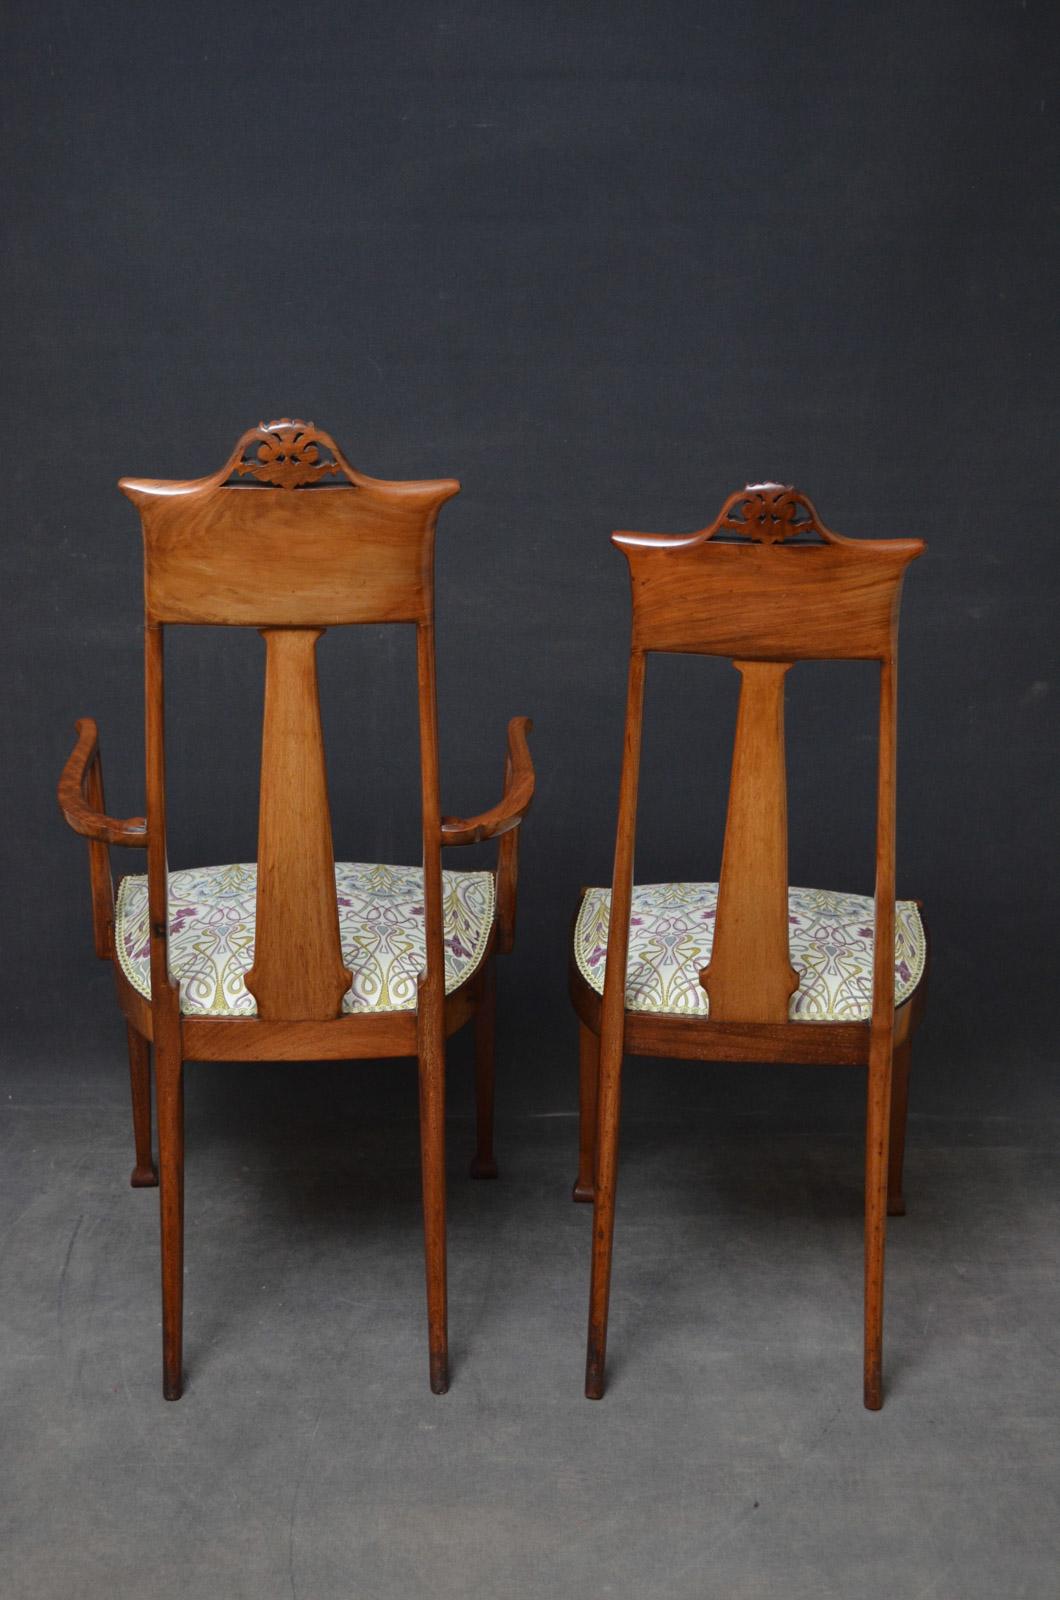 Pair of Art Nouveau Chairs in Mahogany For Sale 7